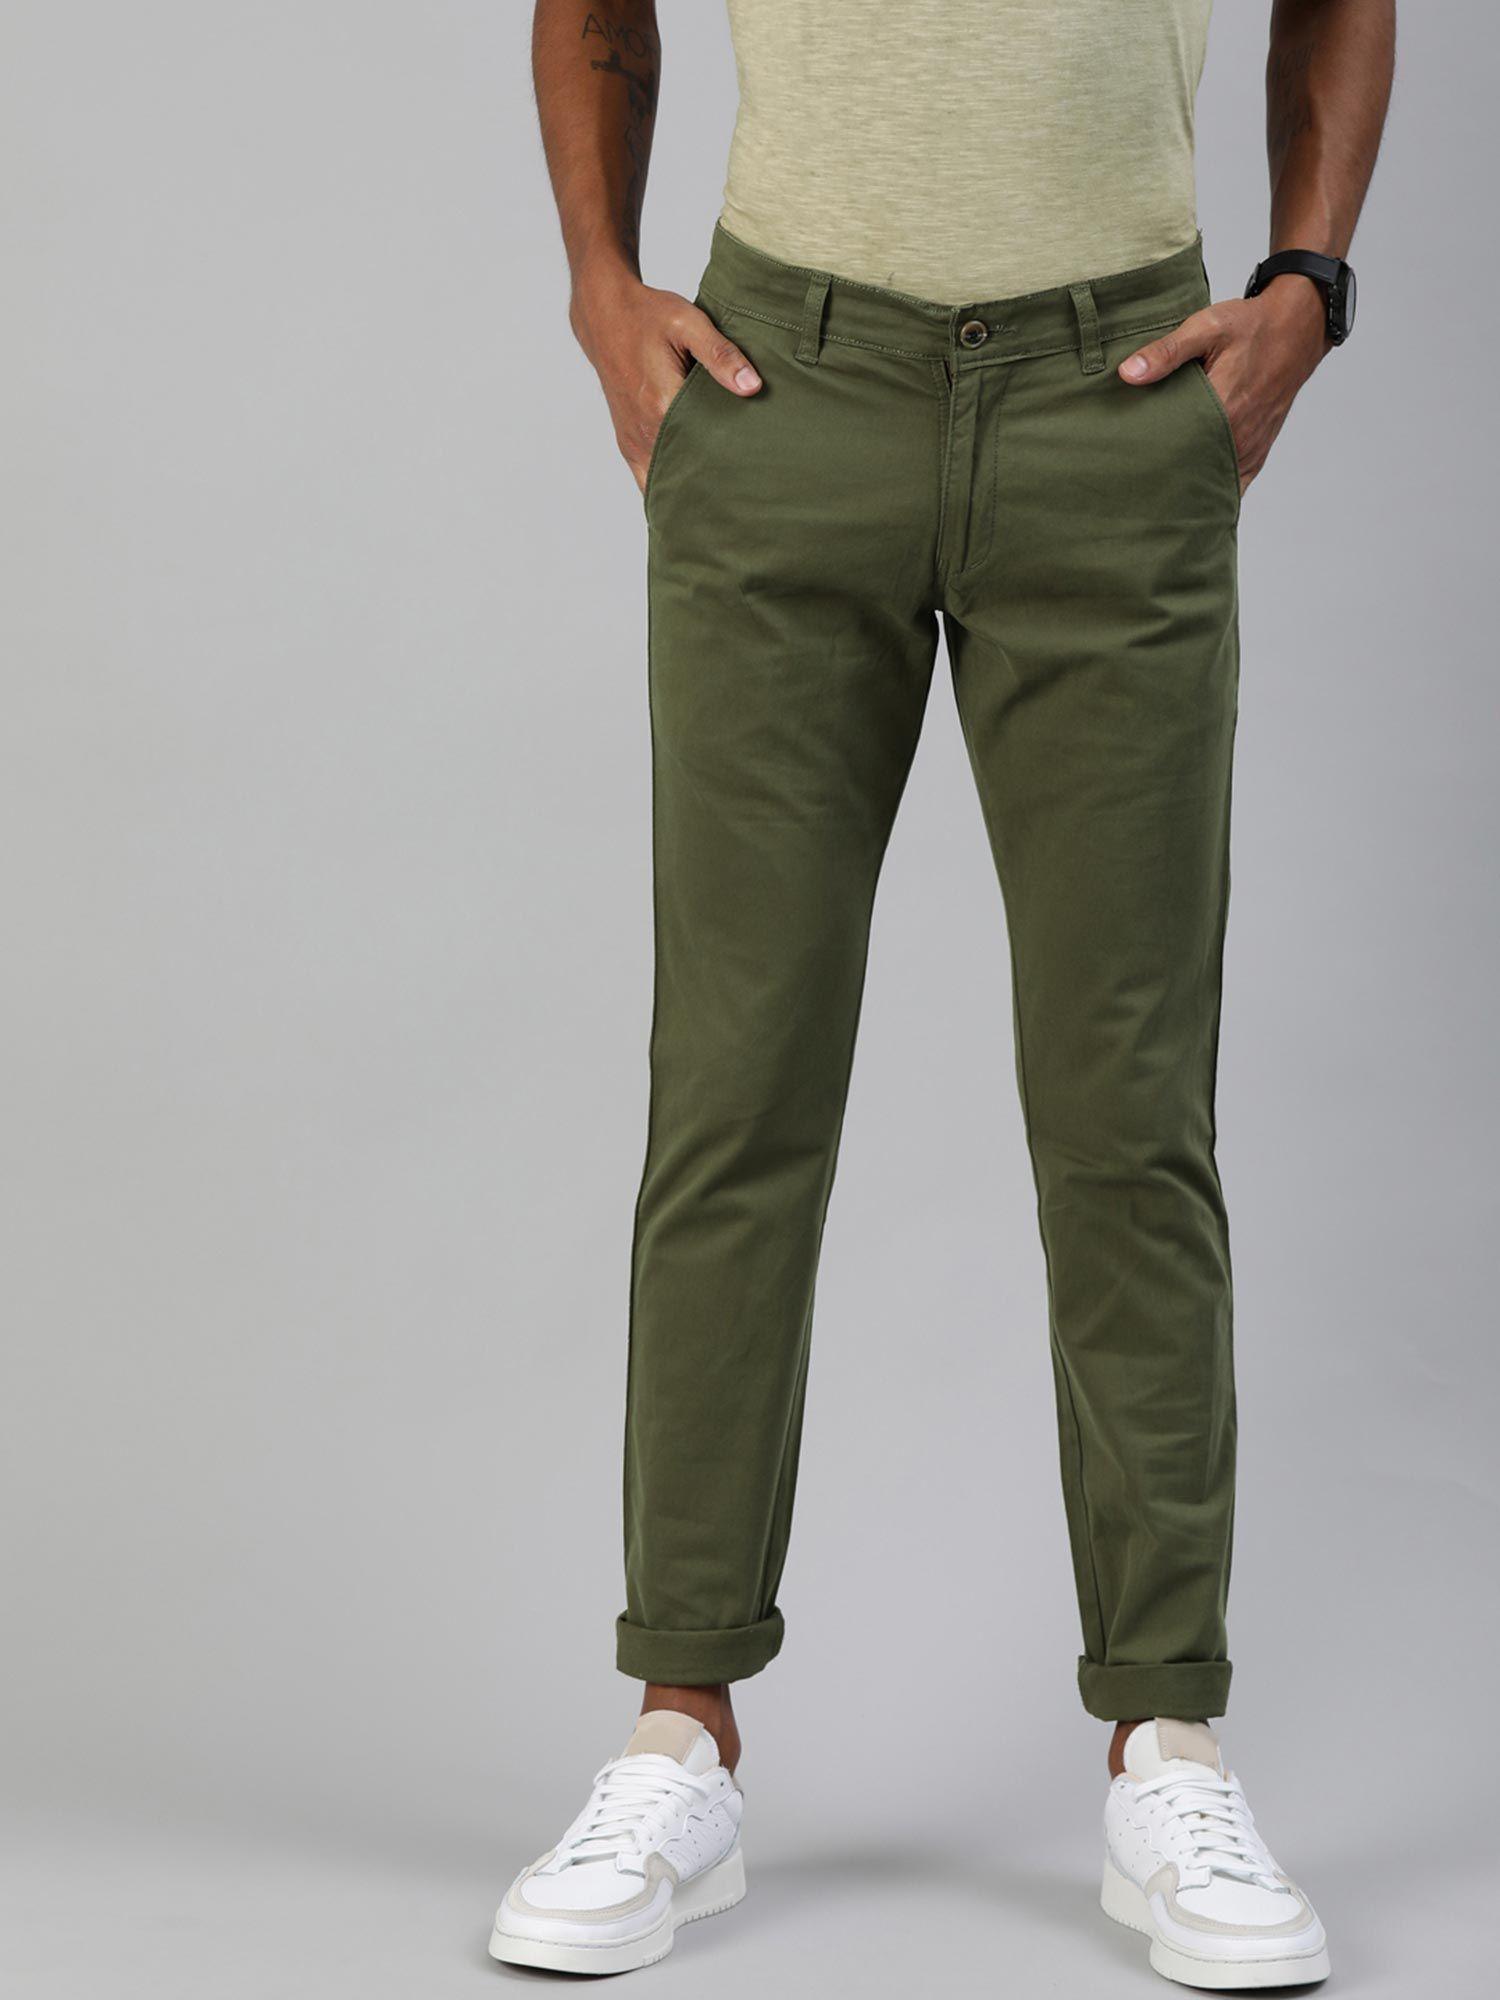 men-olive-green-cotton-slim-fit-casual-chinos-trousers-stretch